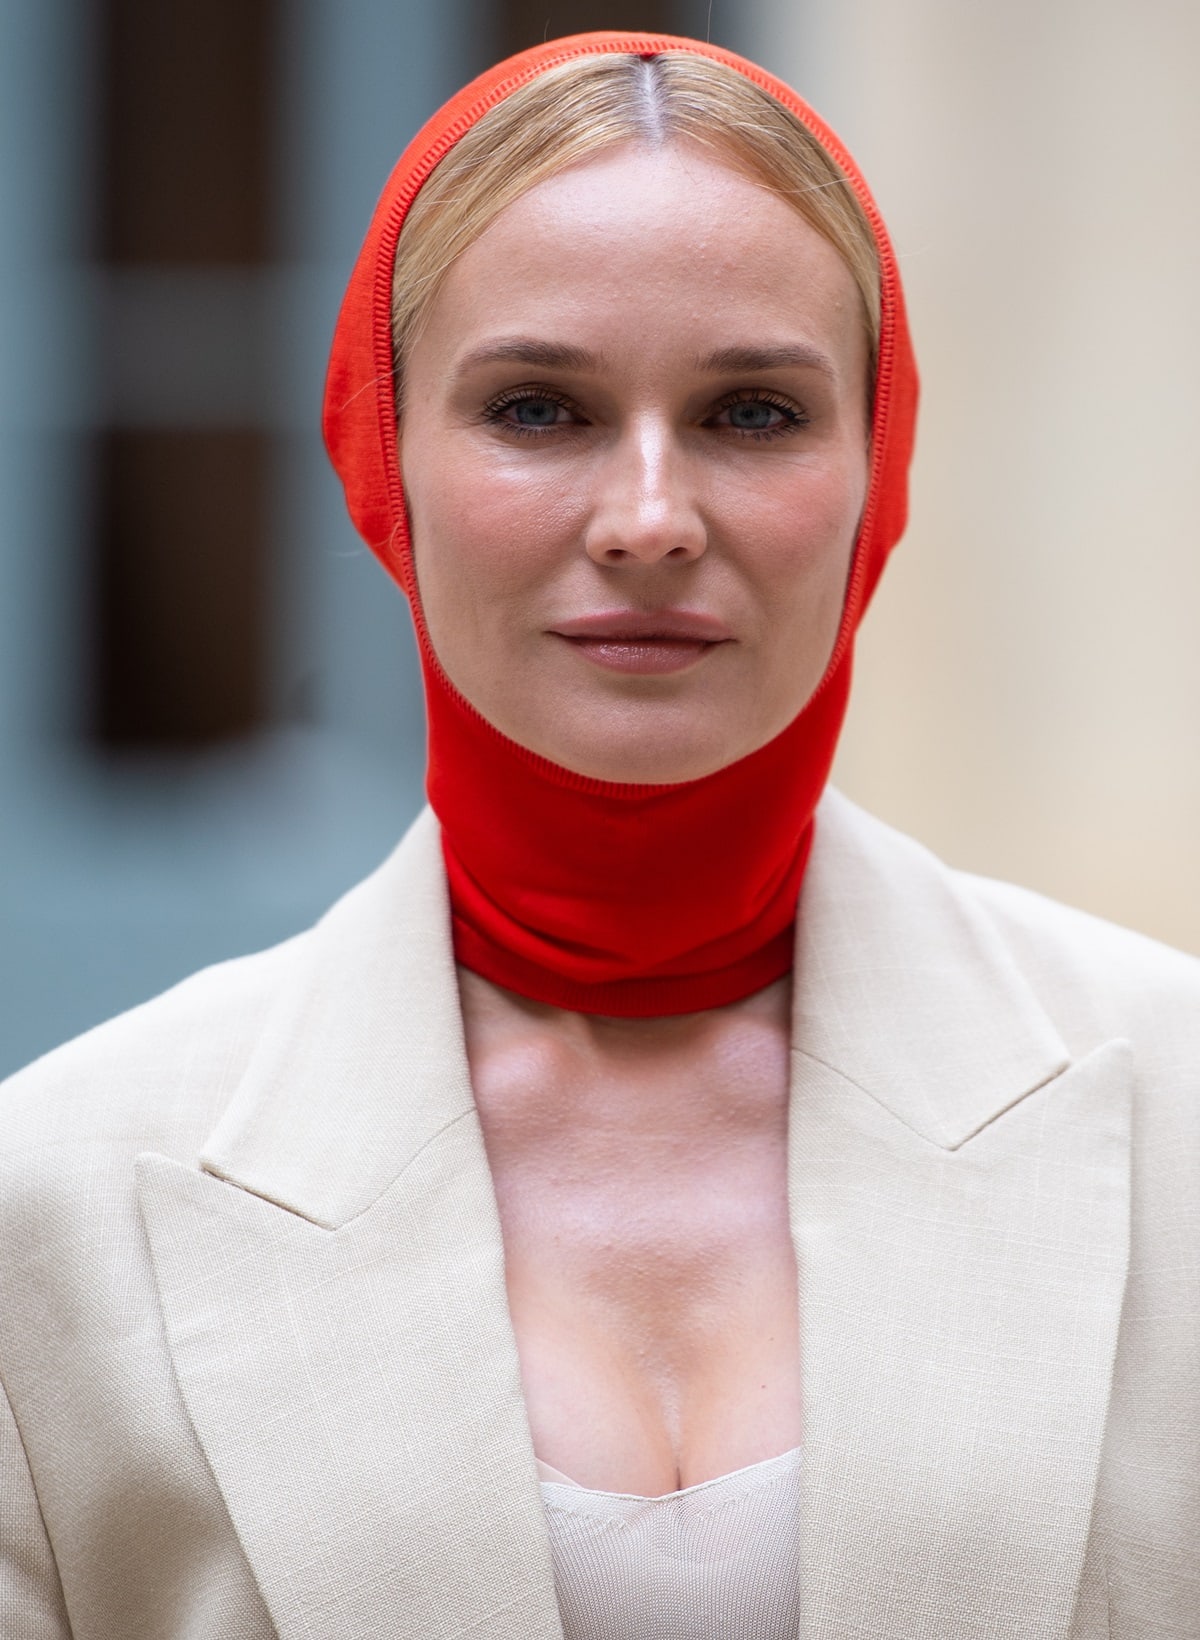 In a fashion-forward statement, Diane Kruger boldly dons a neon red balaclava paired with an oversized long beige blazer jacket